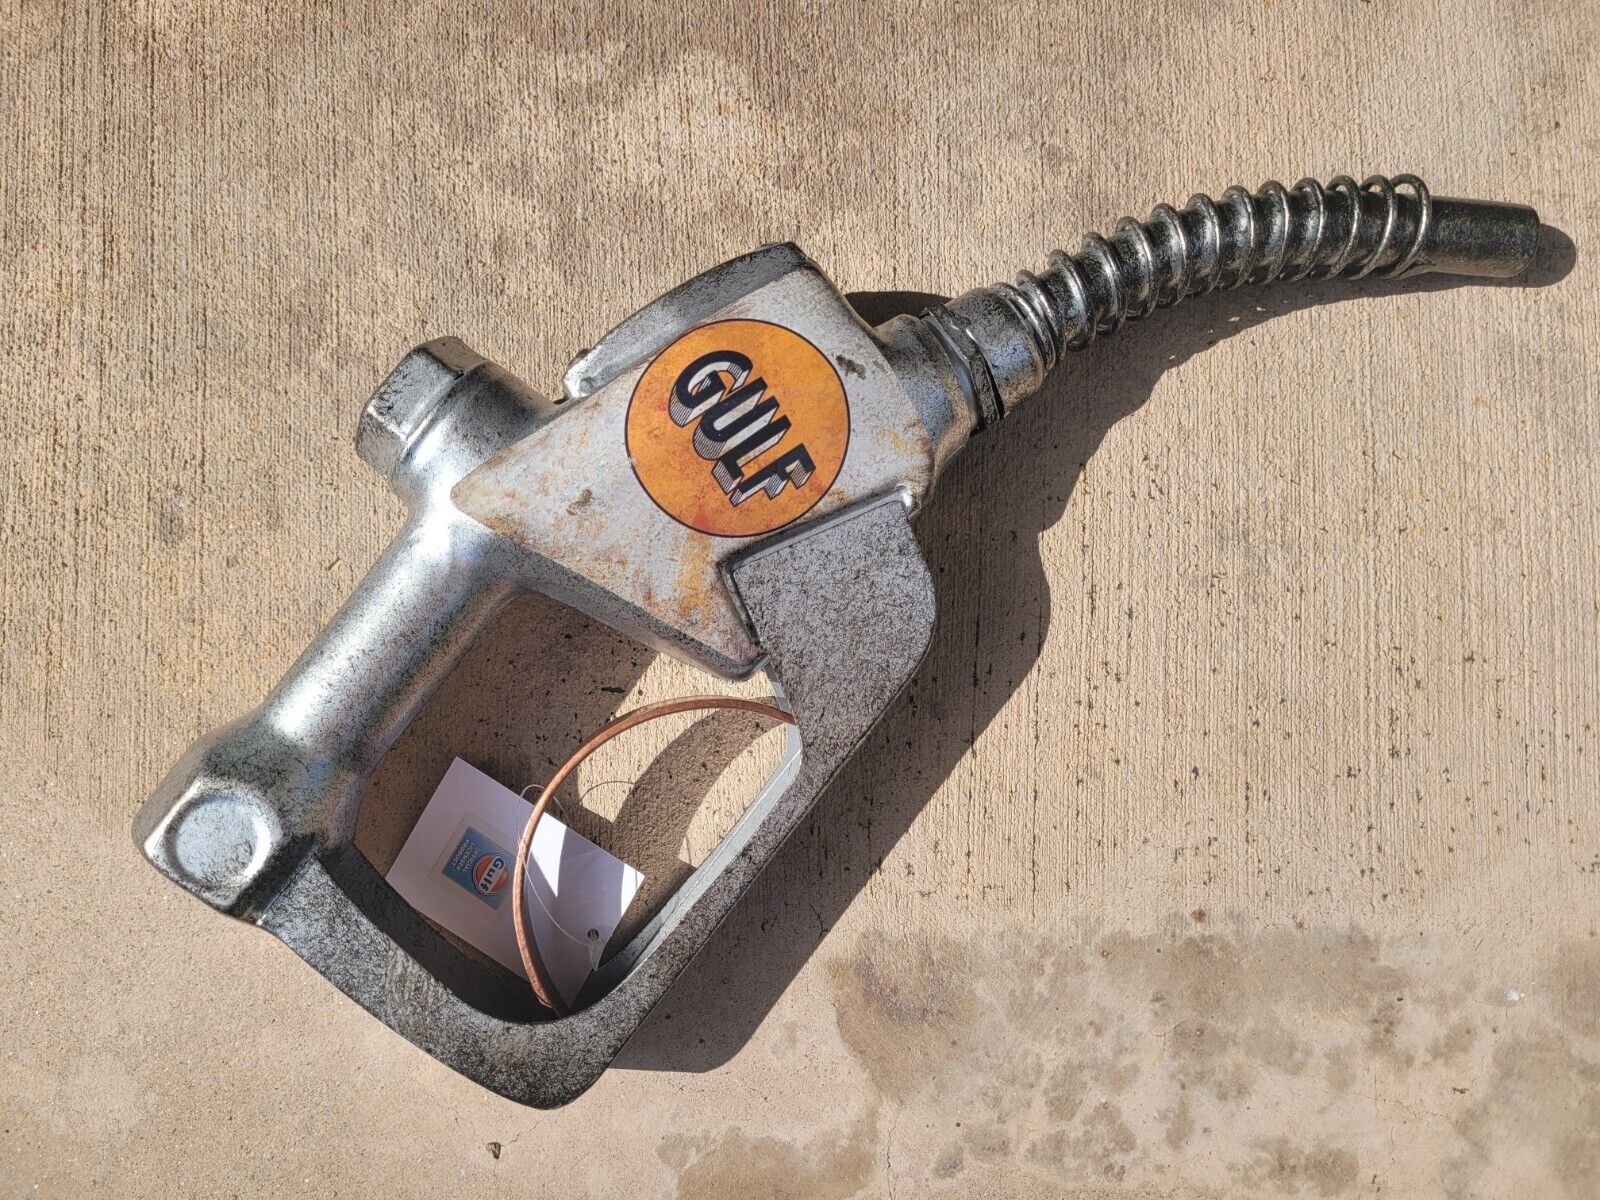 Gulf Oil Gas Pump Nozzle Wall Décor With Vintage Inspired Design